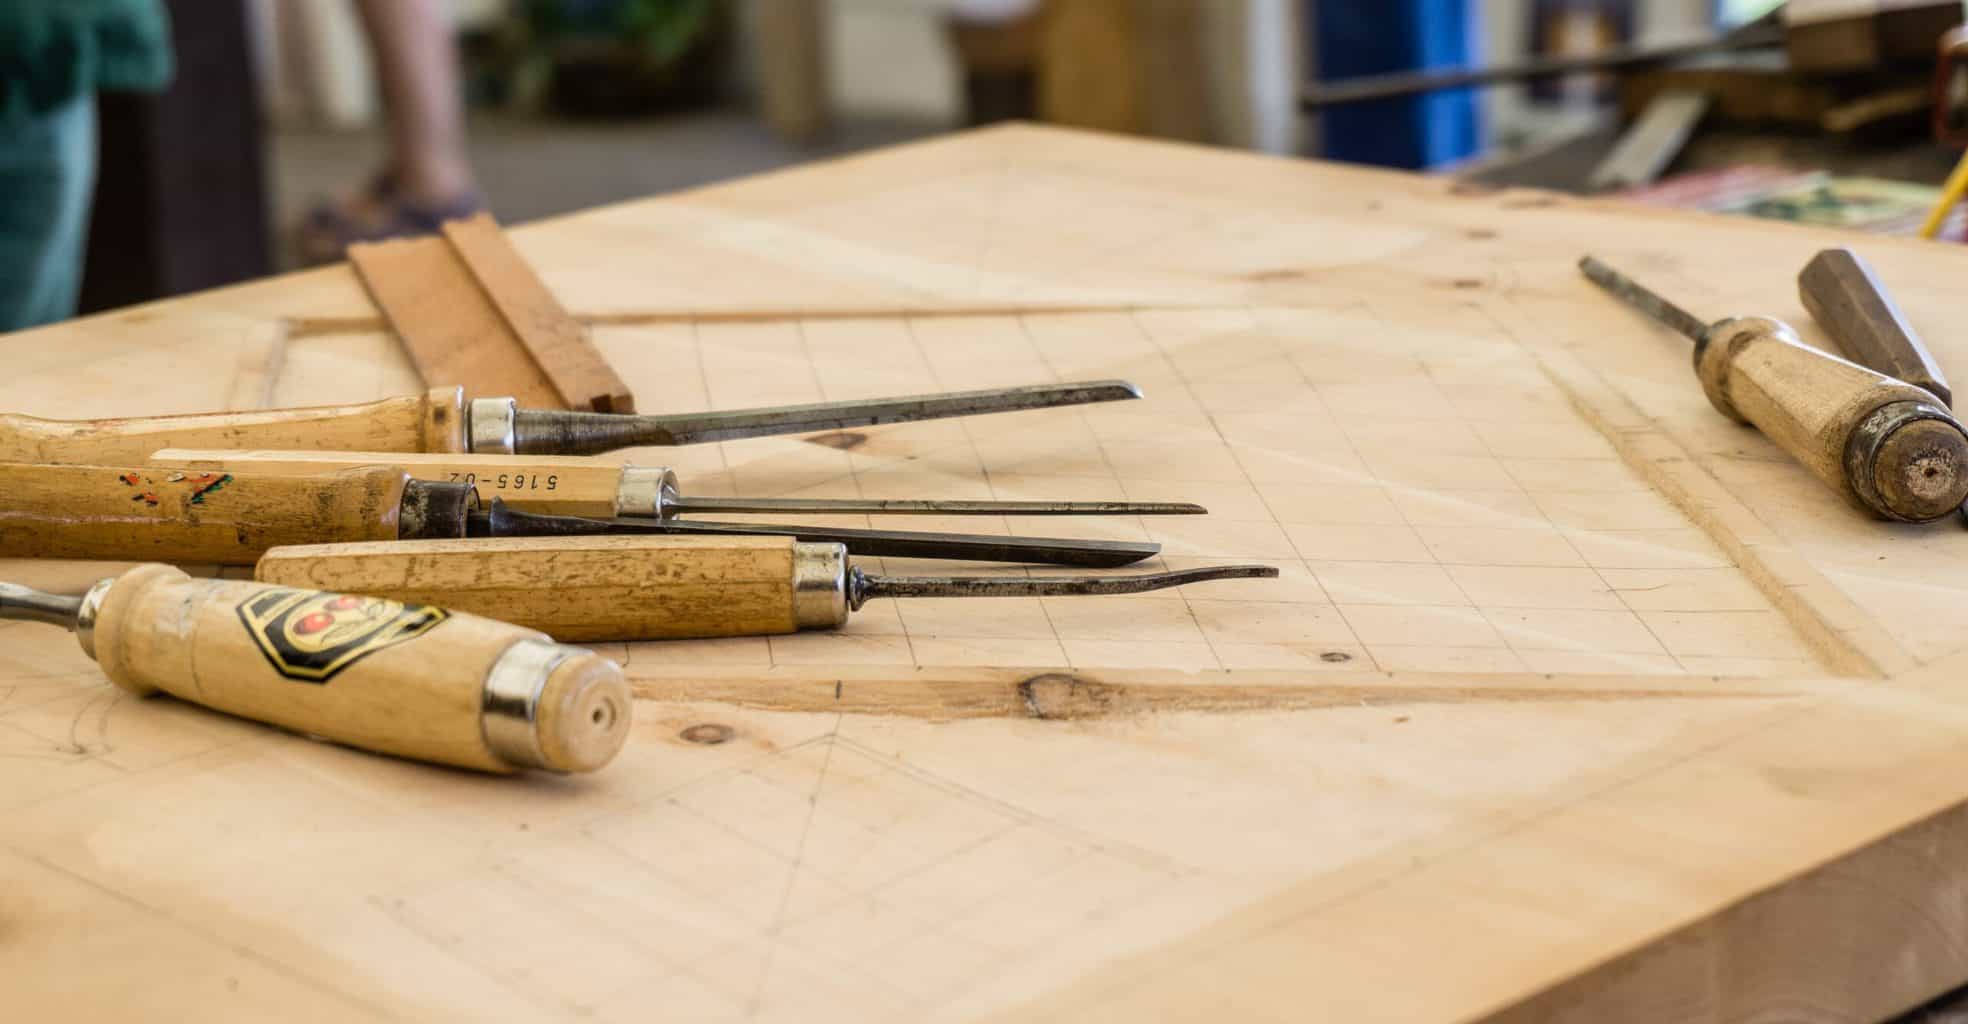 Wood carving tools on top of a wood